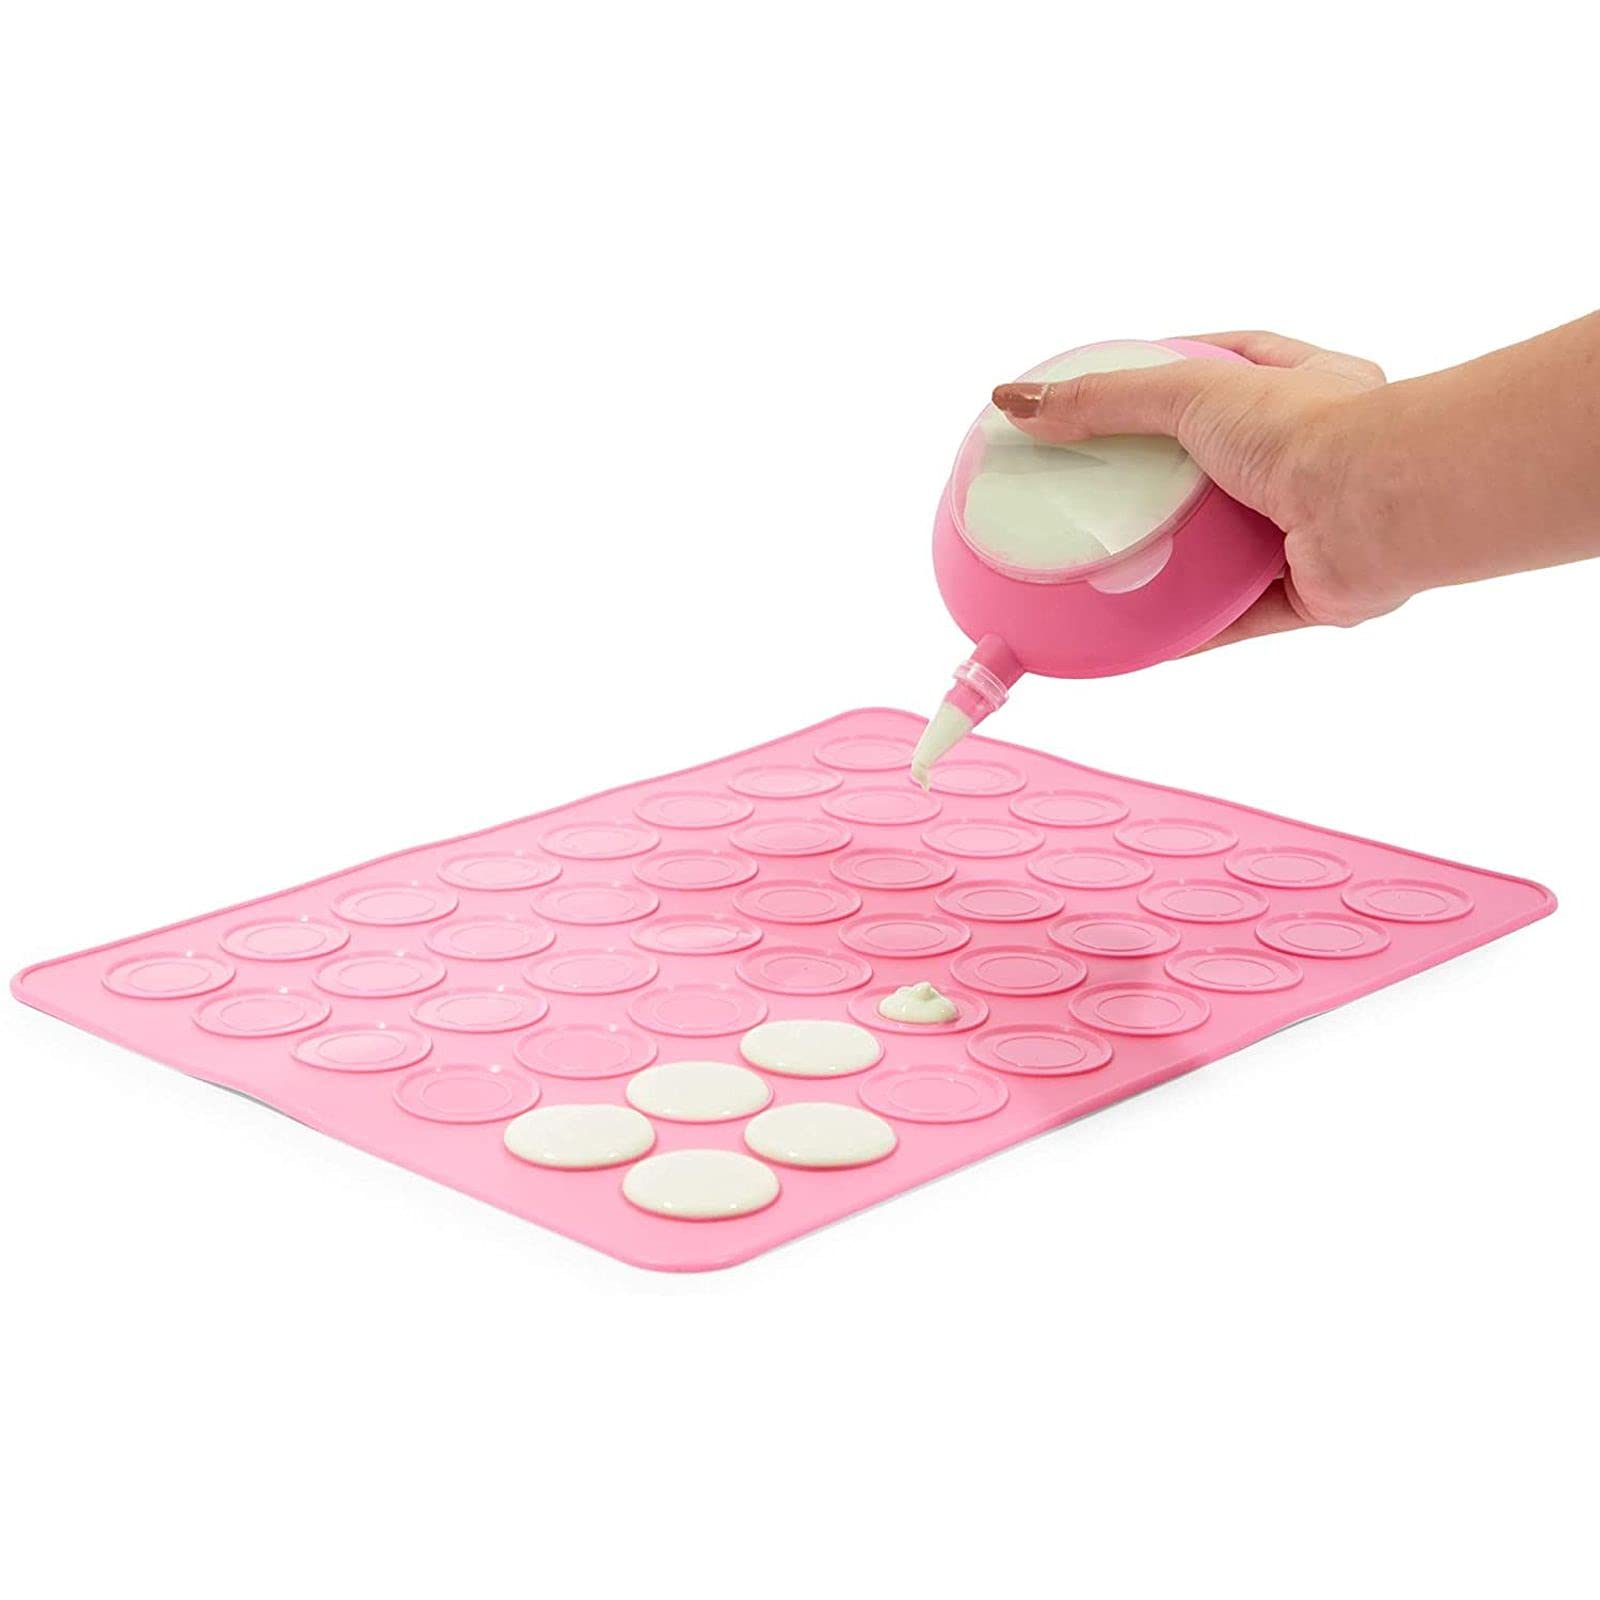 Macaron Baking Kit with Pink Silicone Mat Cookie Sheet, Piping Pot, 5 Nozzle Tips (7-Piece Set)